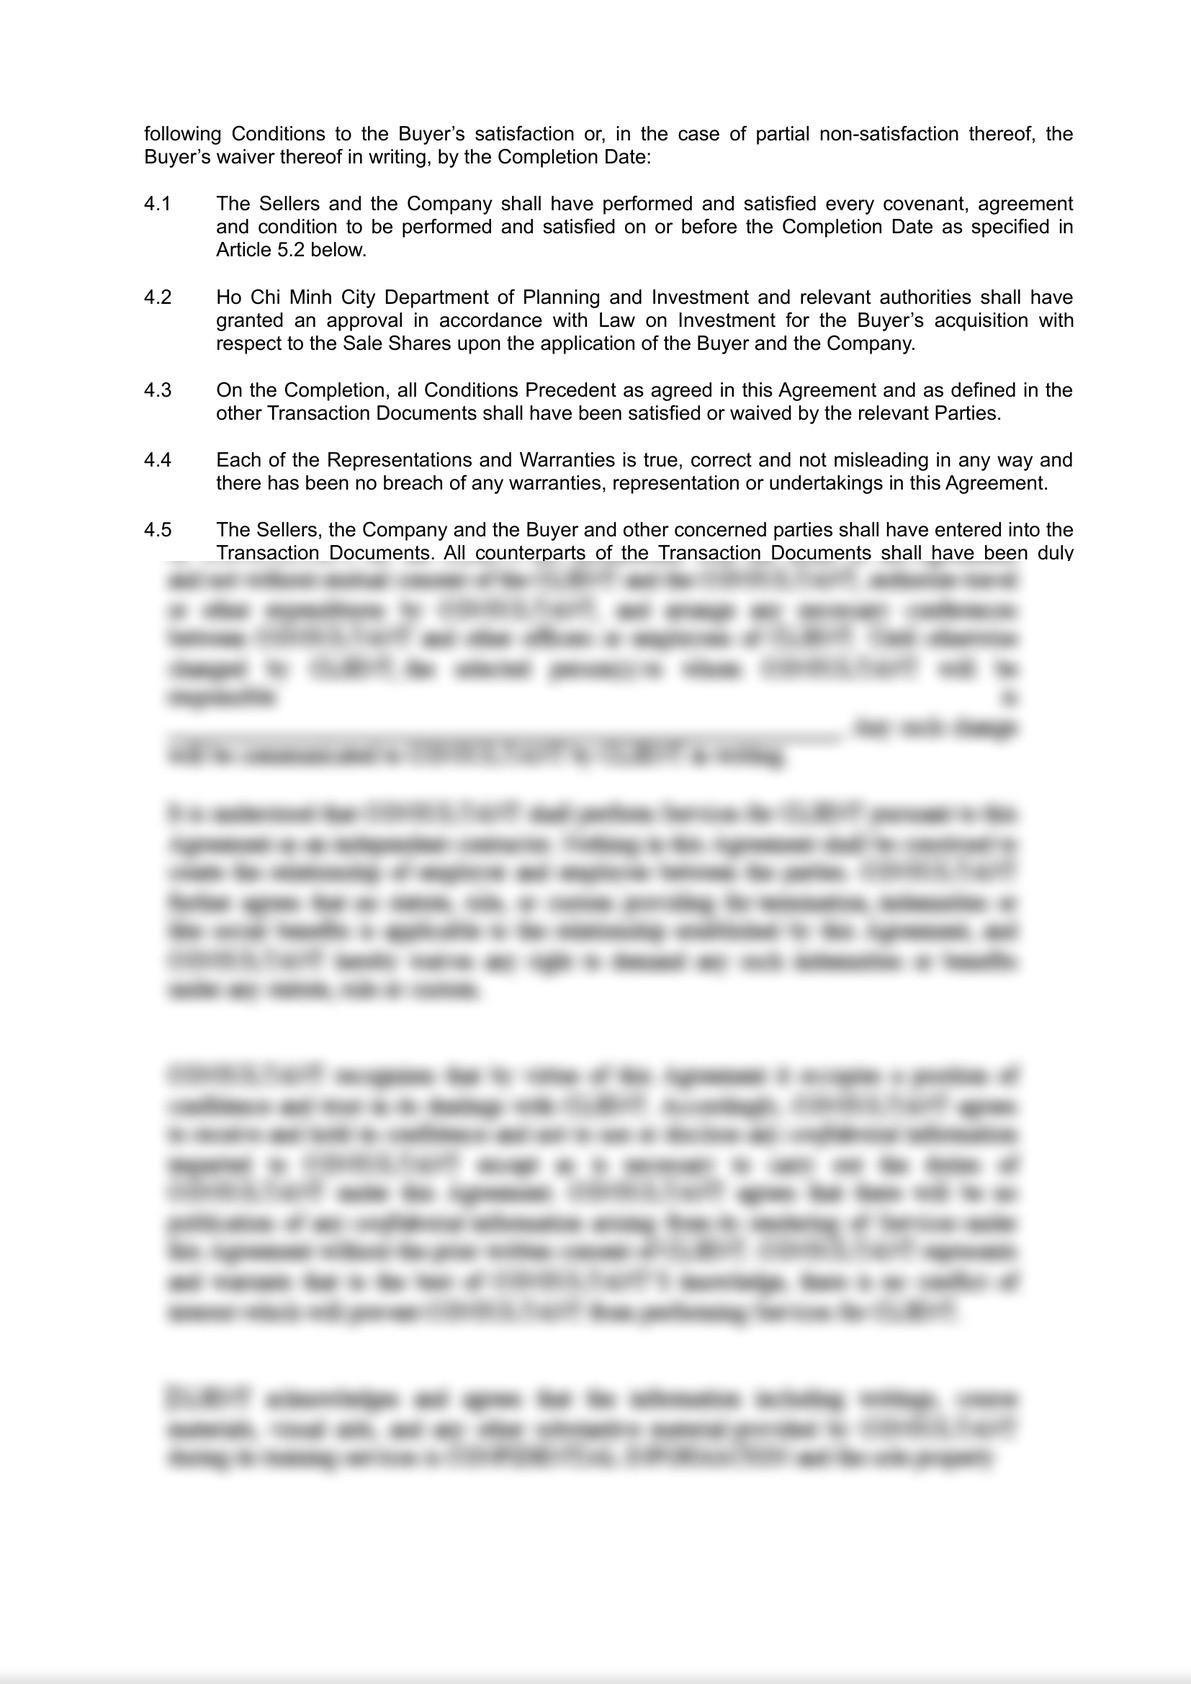 Shares Purchase Agreement-5